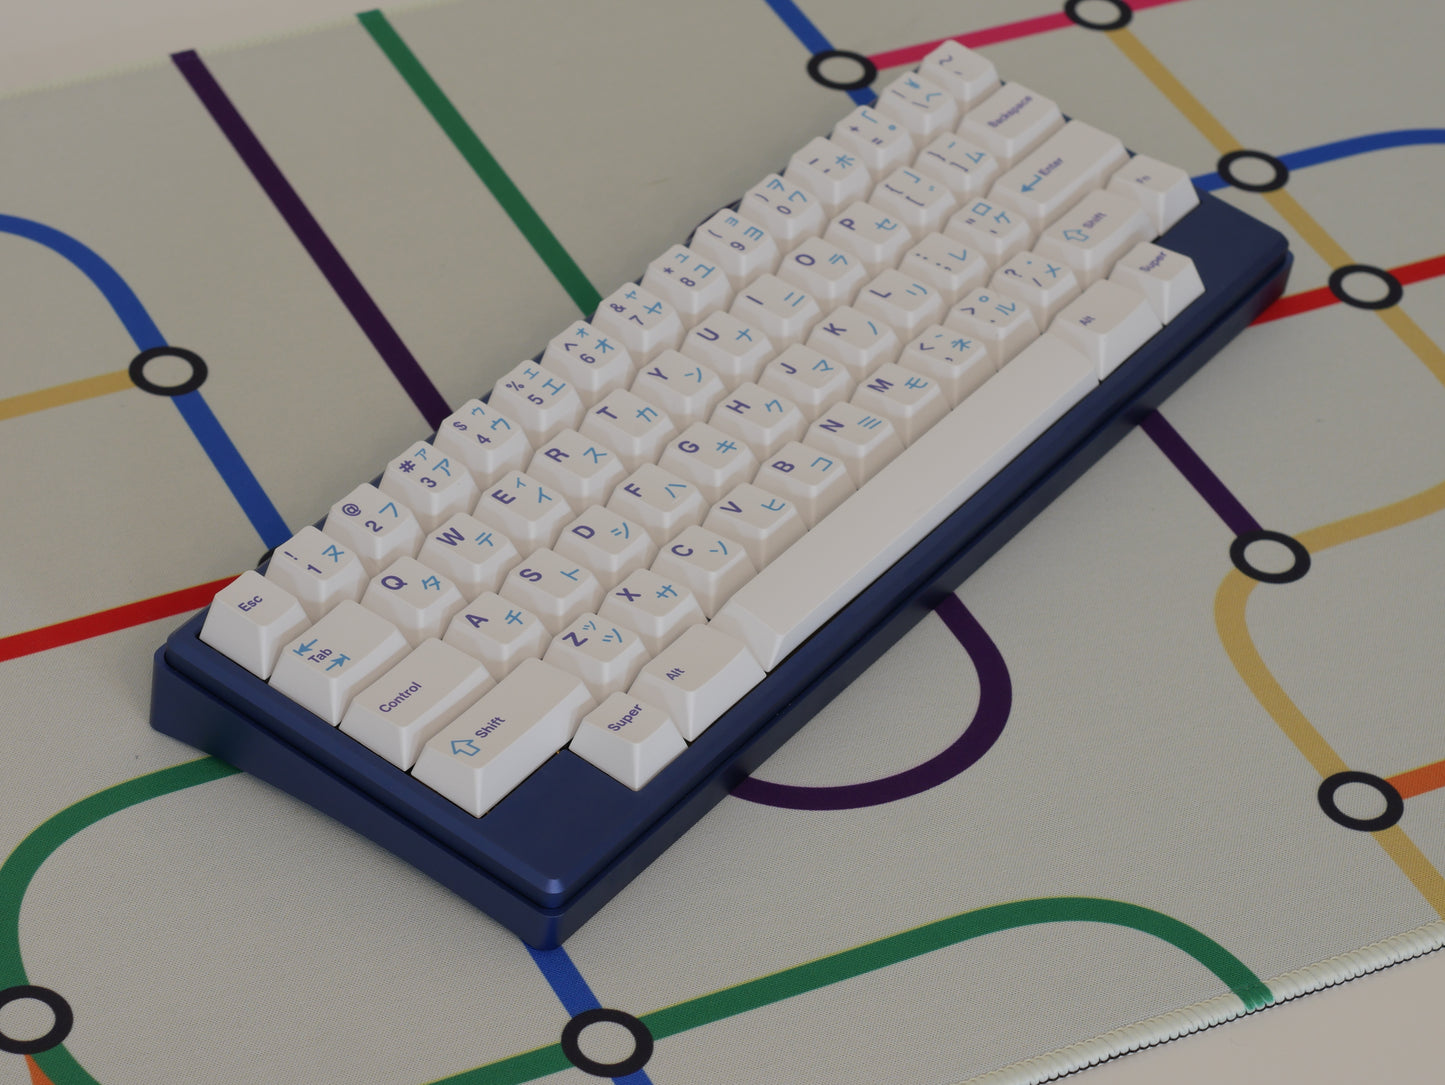 A blue keyboard with white keycaps sits in the middle of the subway transit desk mat with a white background and colorful lines.